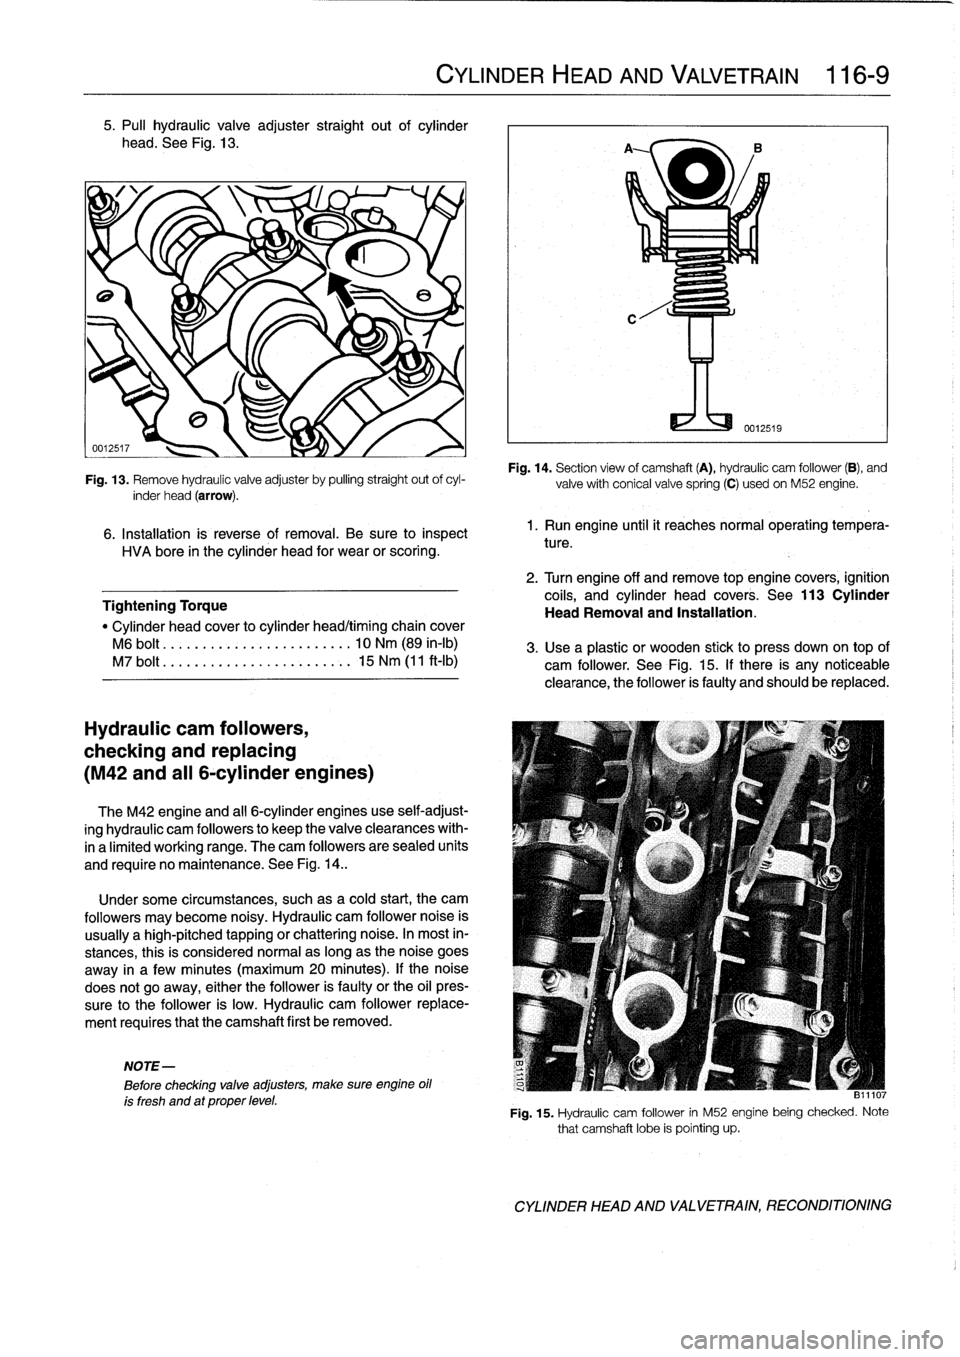 BMW 318i 1995 E36 User Guide 5
.
Pull
hydraulic
valve
adjuster
straight
out
of
cylinder

head
.
See
Fig
.
13
.

Fig
.
13
.
Remove
hydraulic
valve
adjuster
by
pulling
straight
out
ofcyl-
inder
head
(arrow)
.

6
.
Installation
is
r